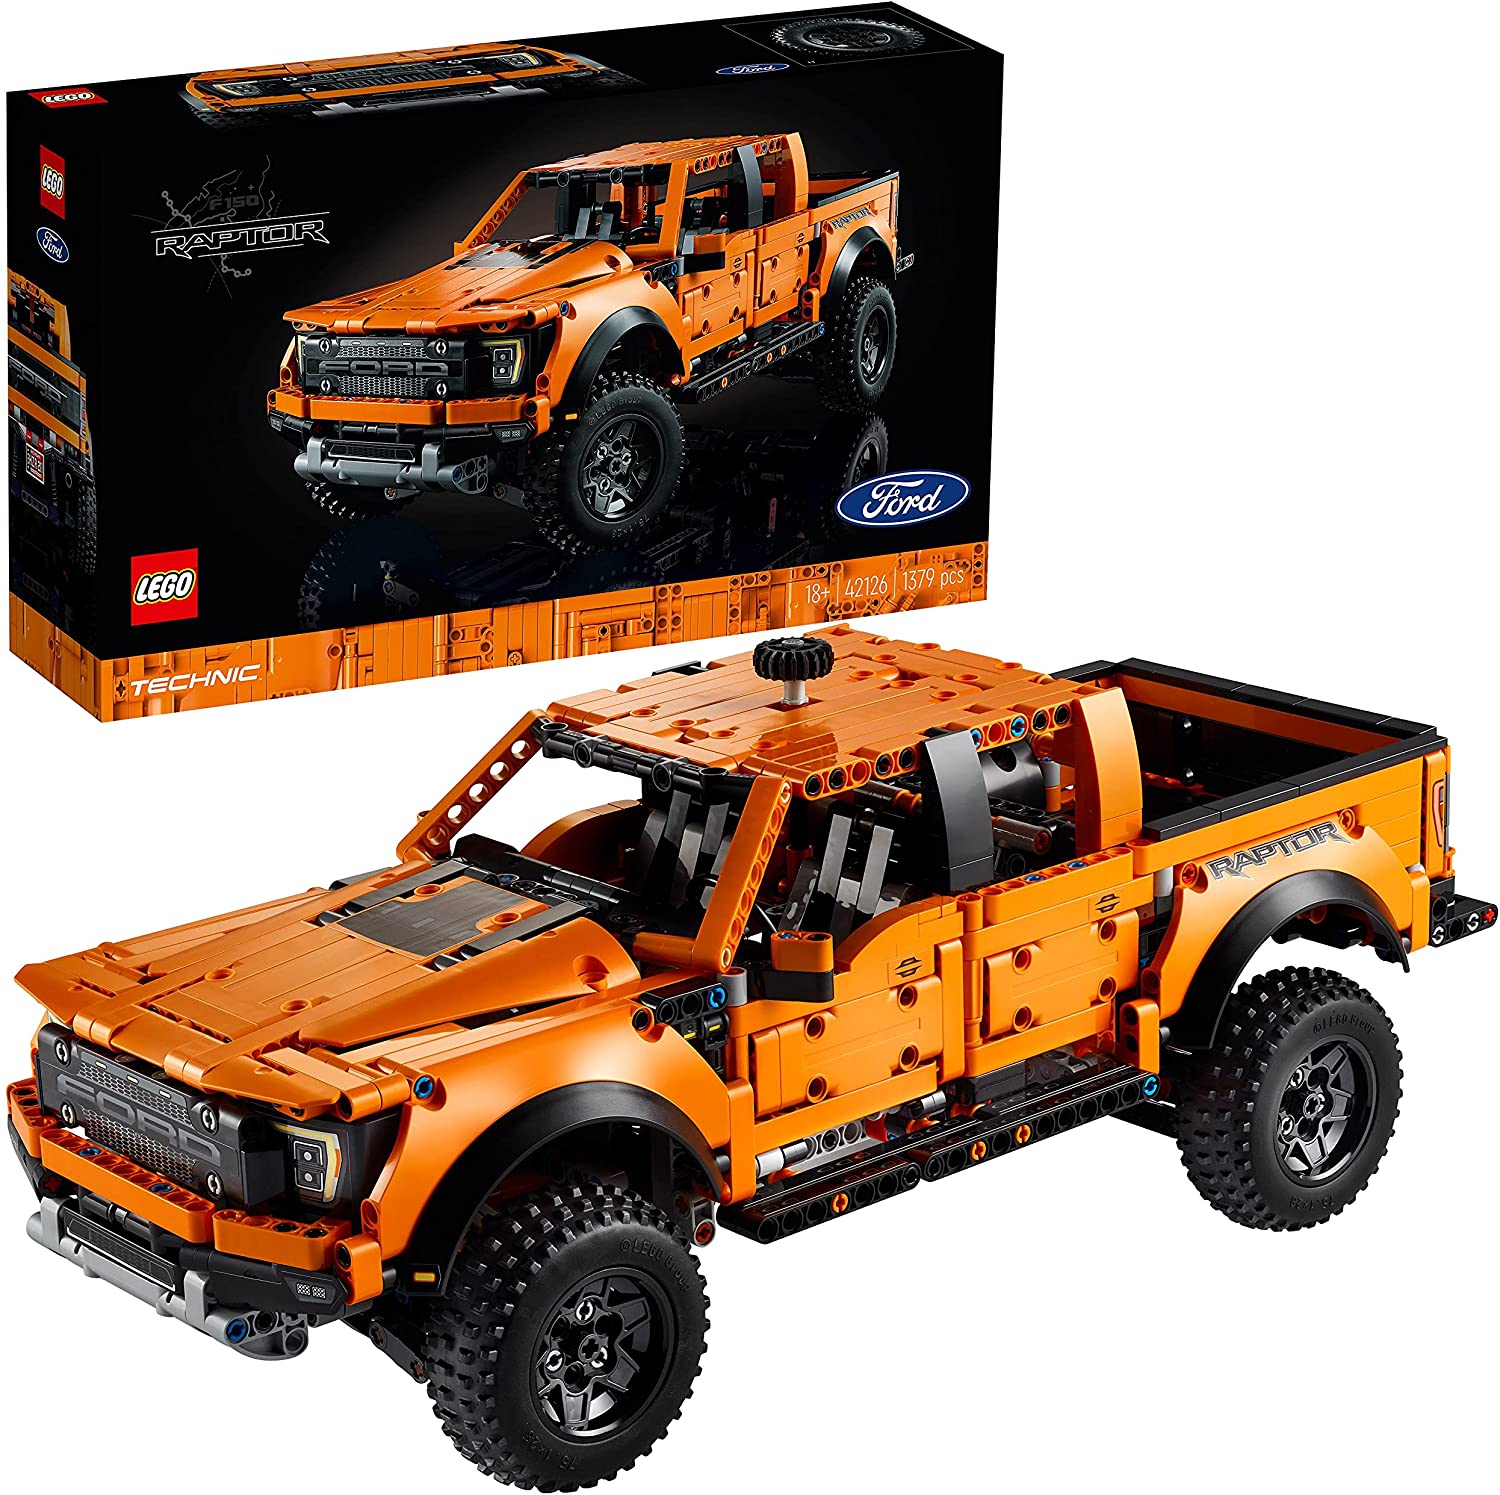 LEGO 42126 Technic Ford F-150 Raptor Pick-Up Truck, Model Car for Adults, E